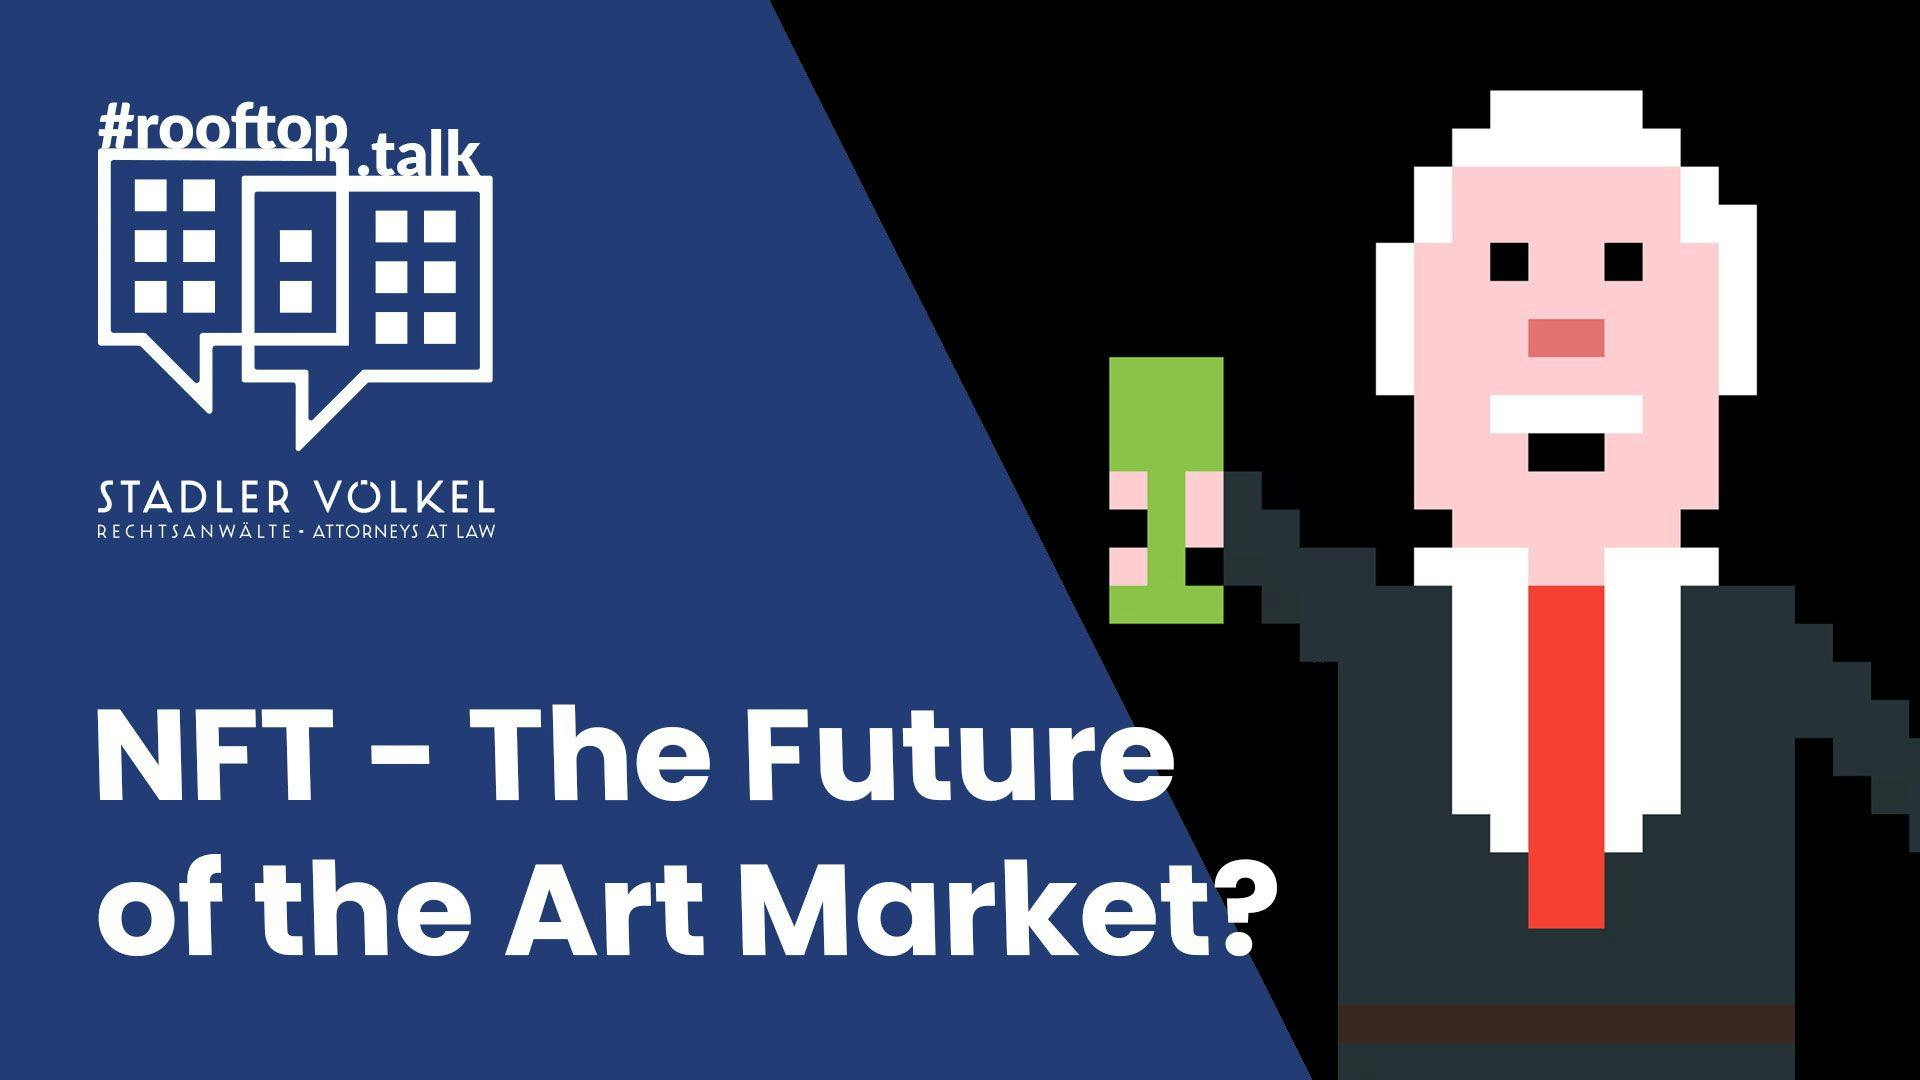 rooftop.talk 32: NFT- The Future of the Art Market?